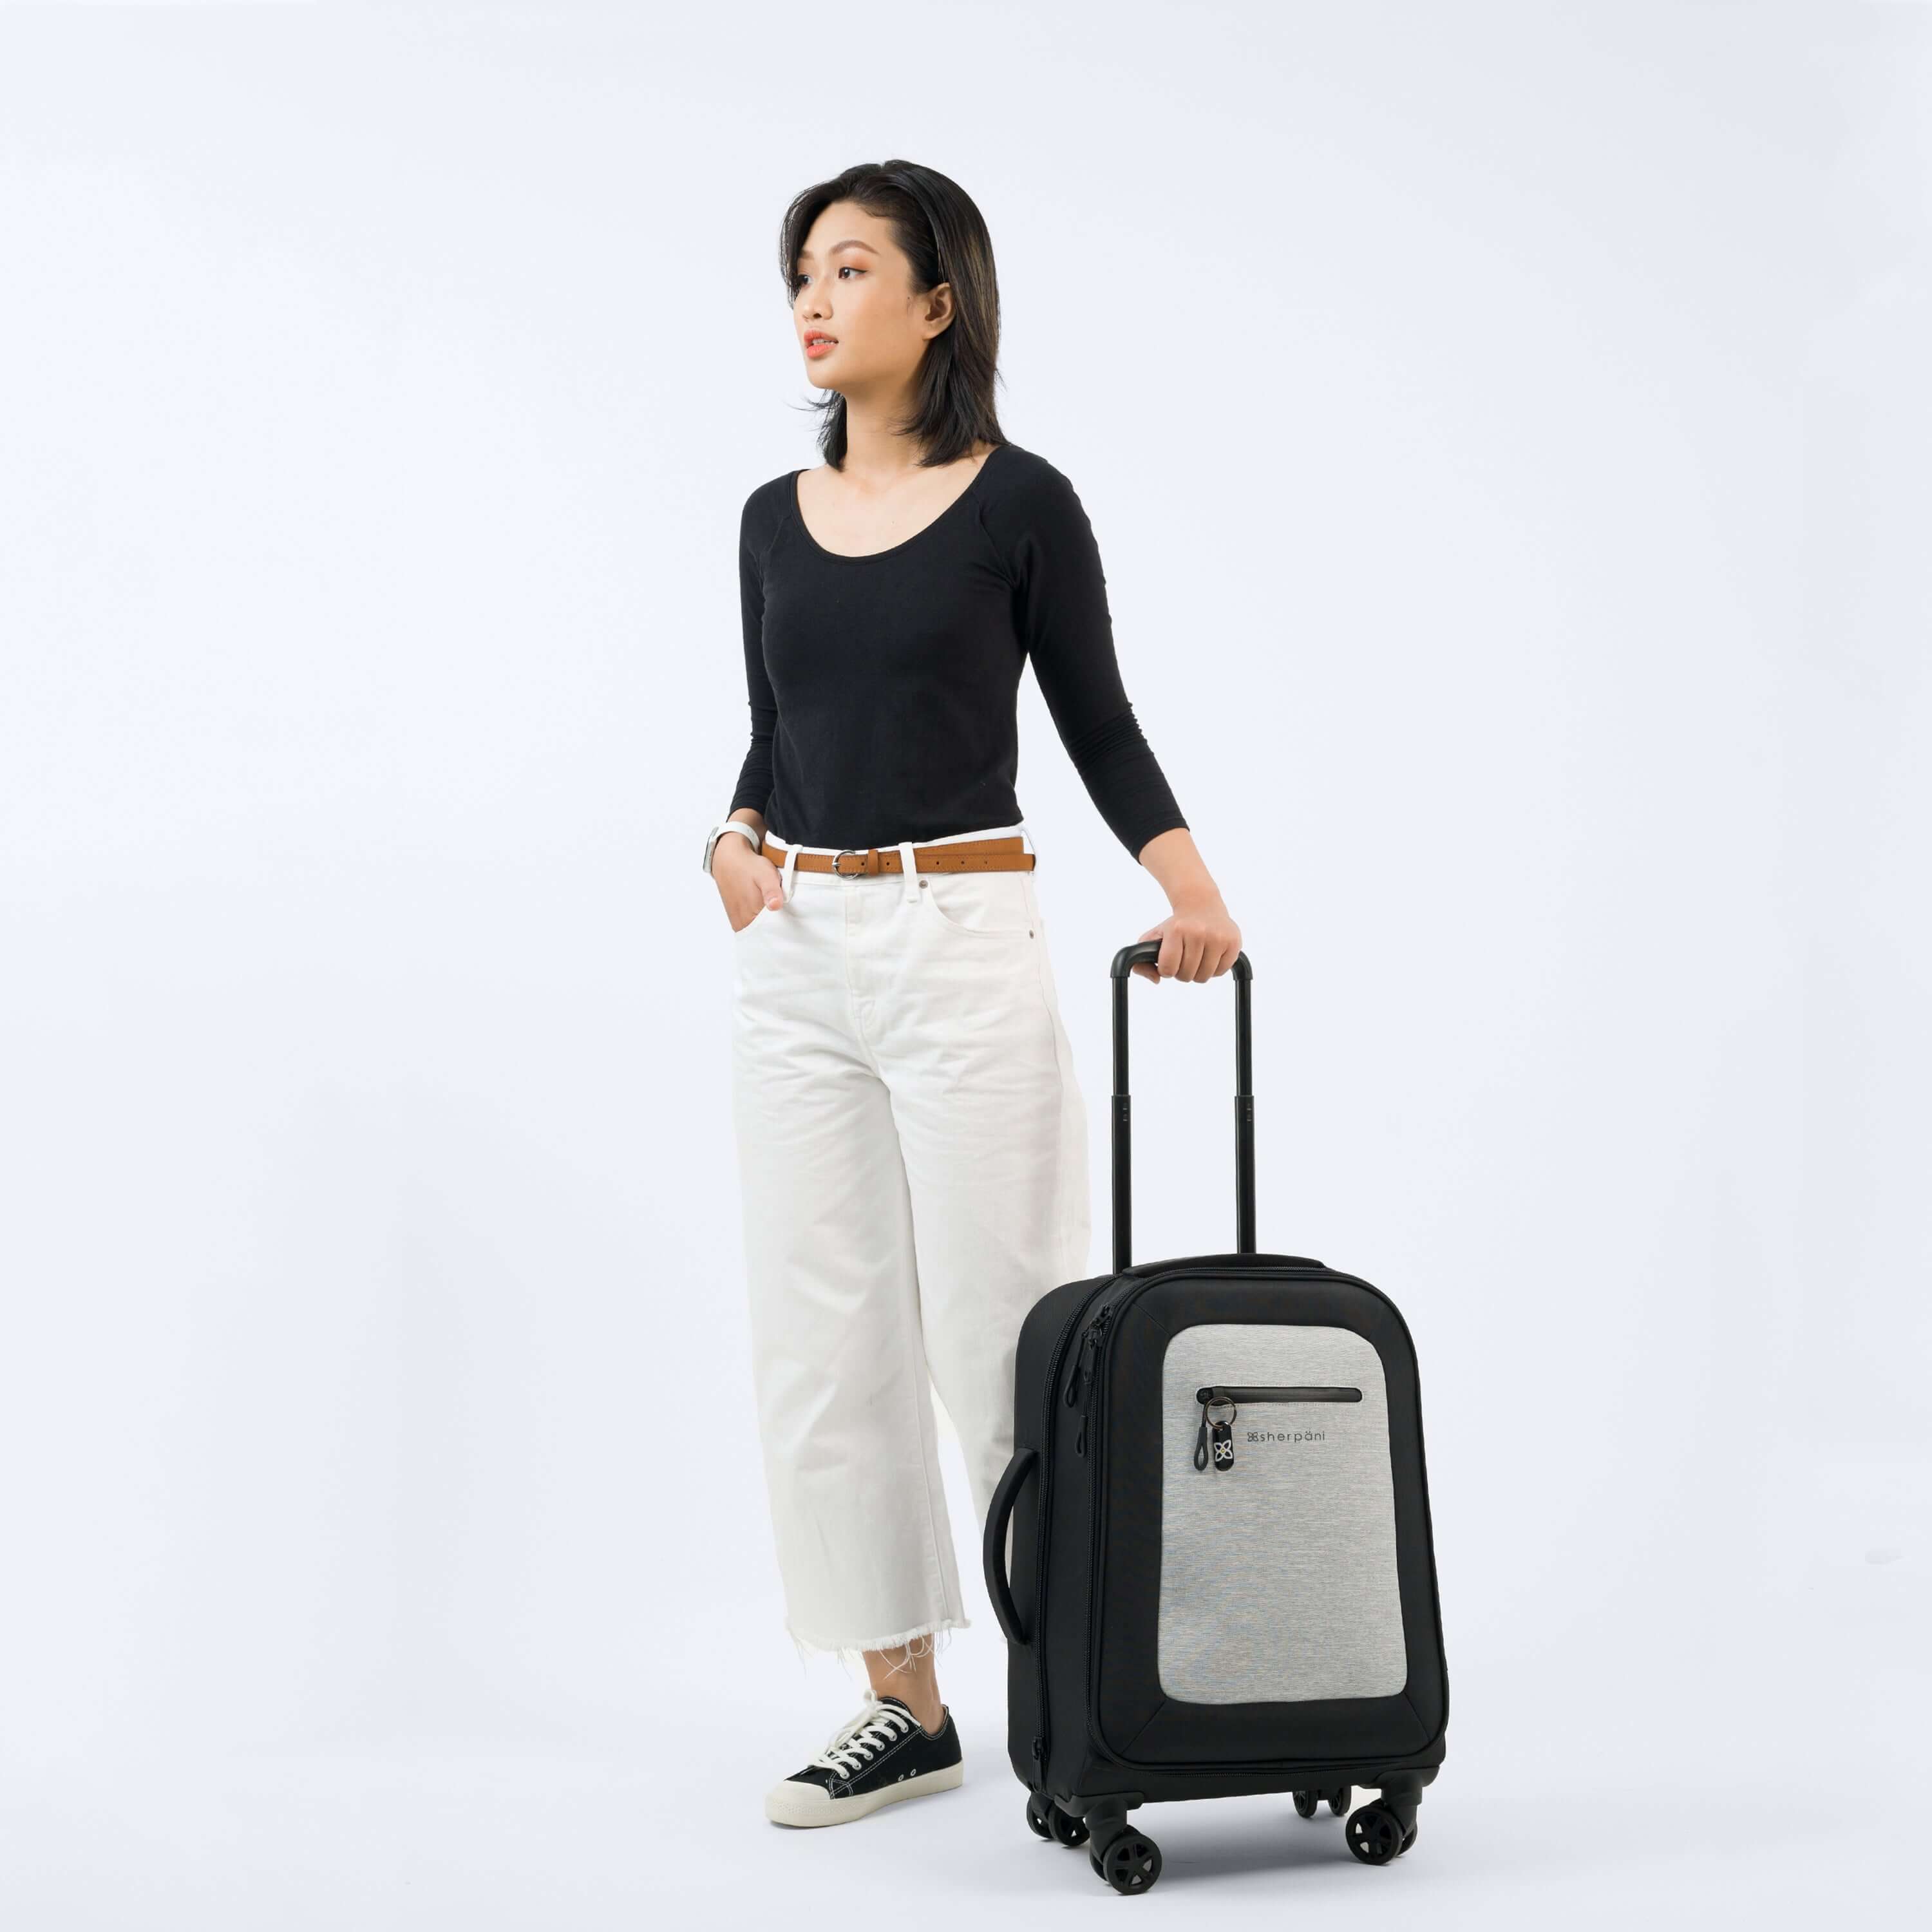 A dark haired woman stands at an angle to the camera. She is wearing a black top, white jeans and Converse. Her left hand holds the luggage handle of Sherpani's Anti-Theft luggage, the Latitude in Sterling, which stands next to her. 